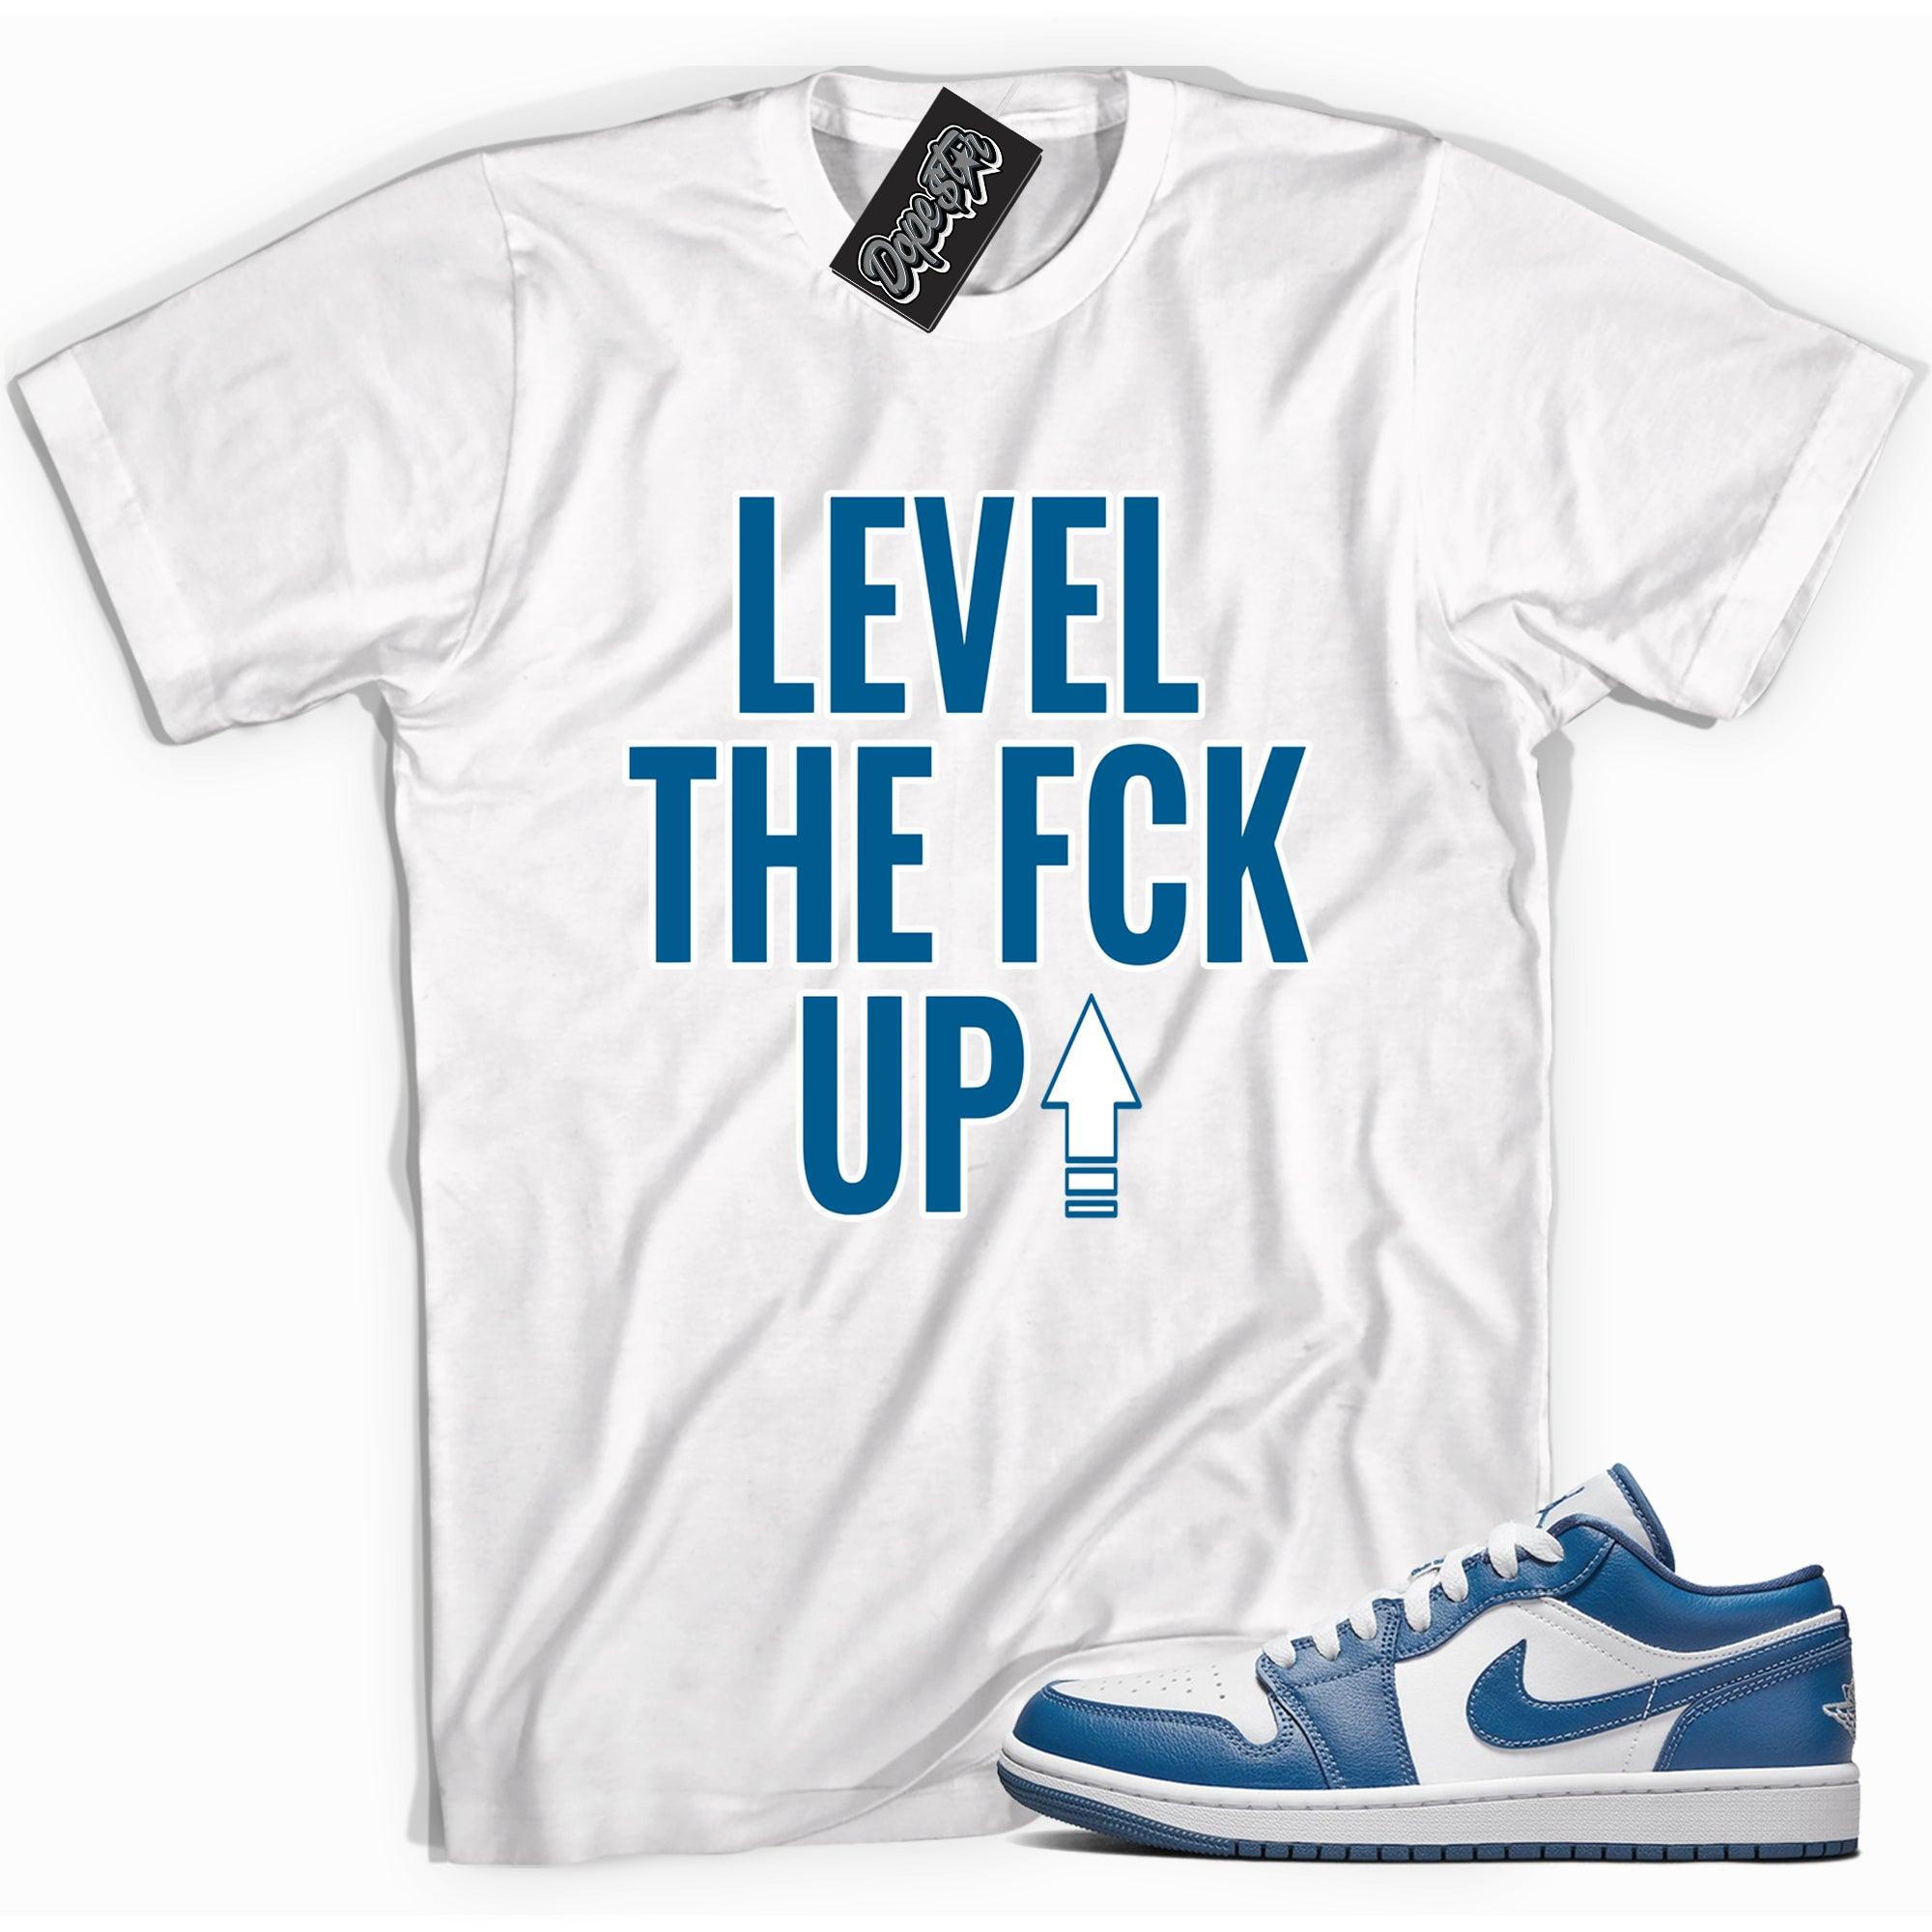 Cool white graphic tee with 'Level Up' print, that perfectly matches Air Jordan 1 1 Low Marina Blue sneakers.